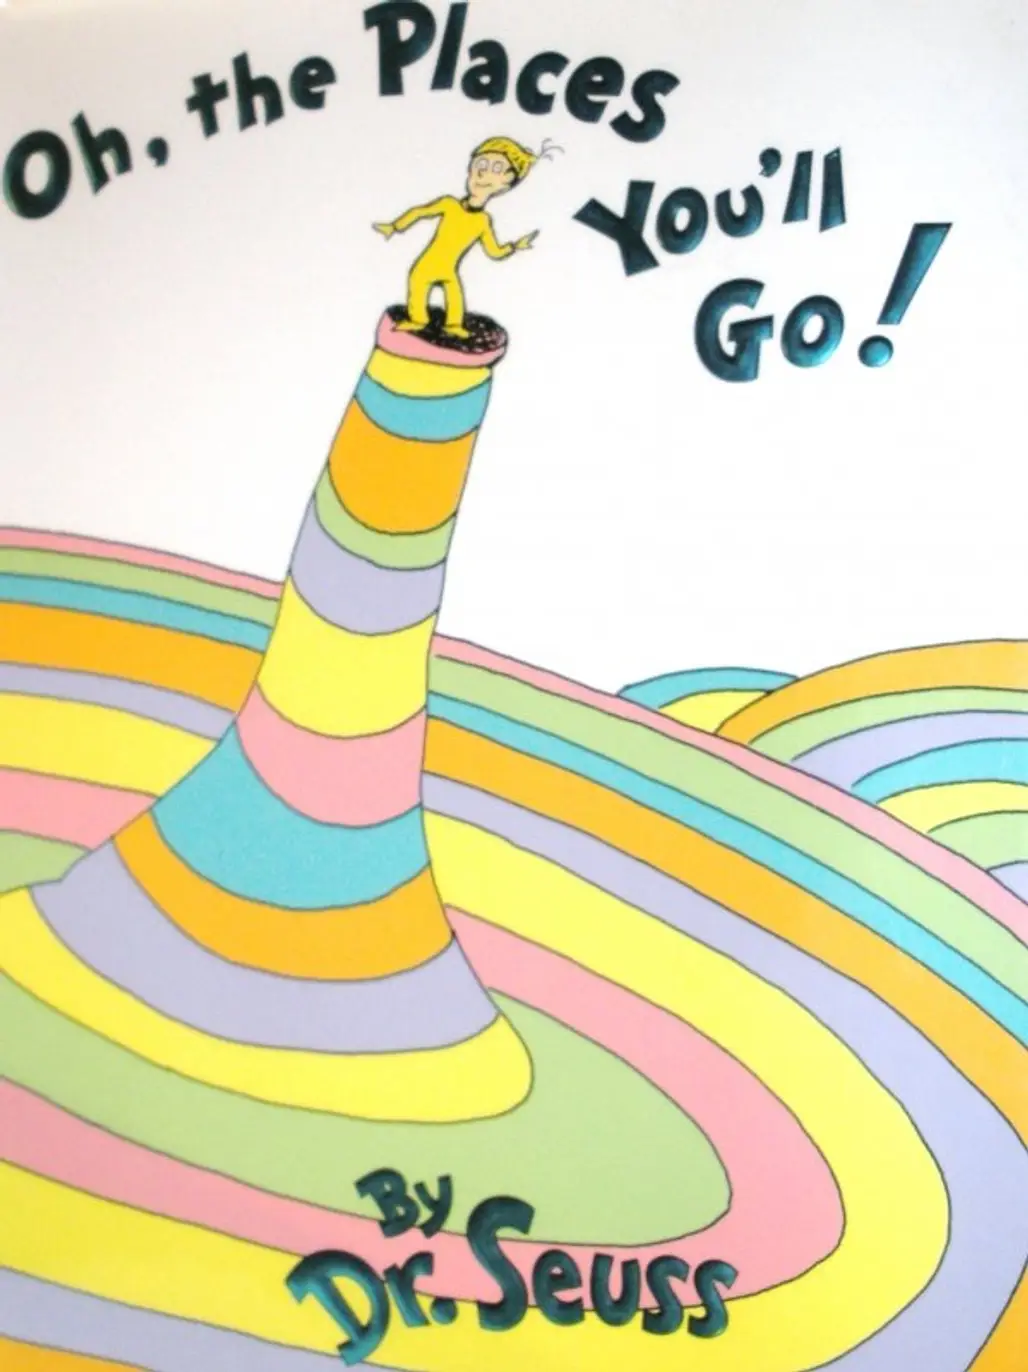 Oh, the Places You'll Go by Dr Seuss